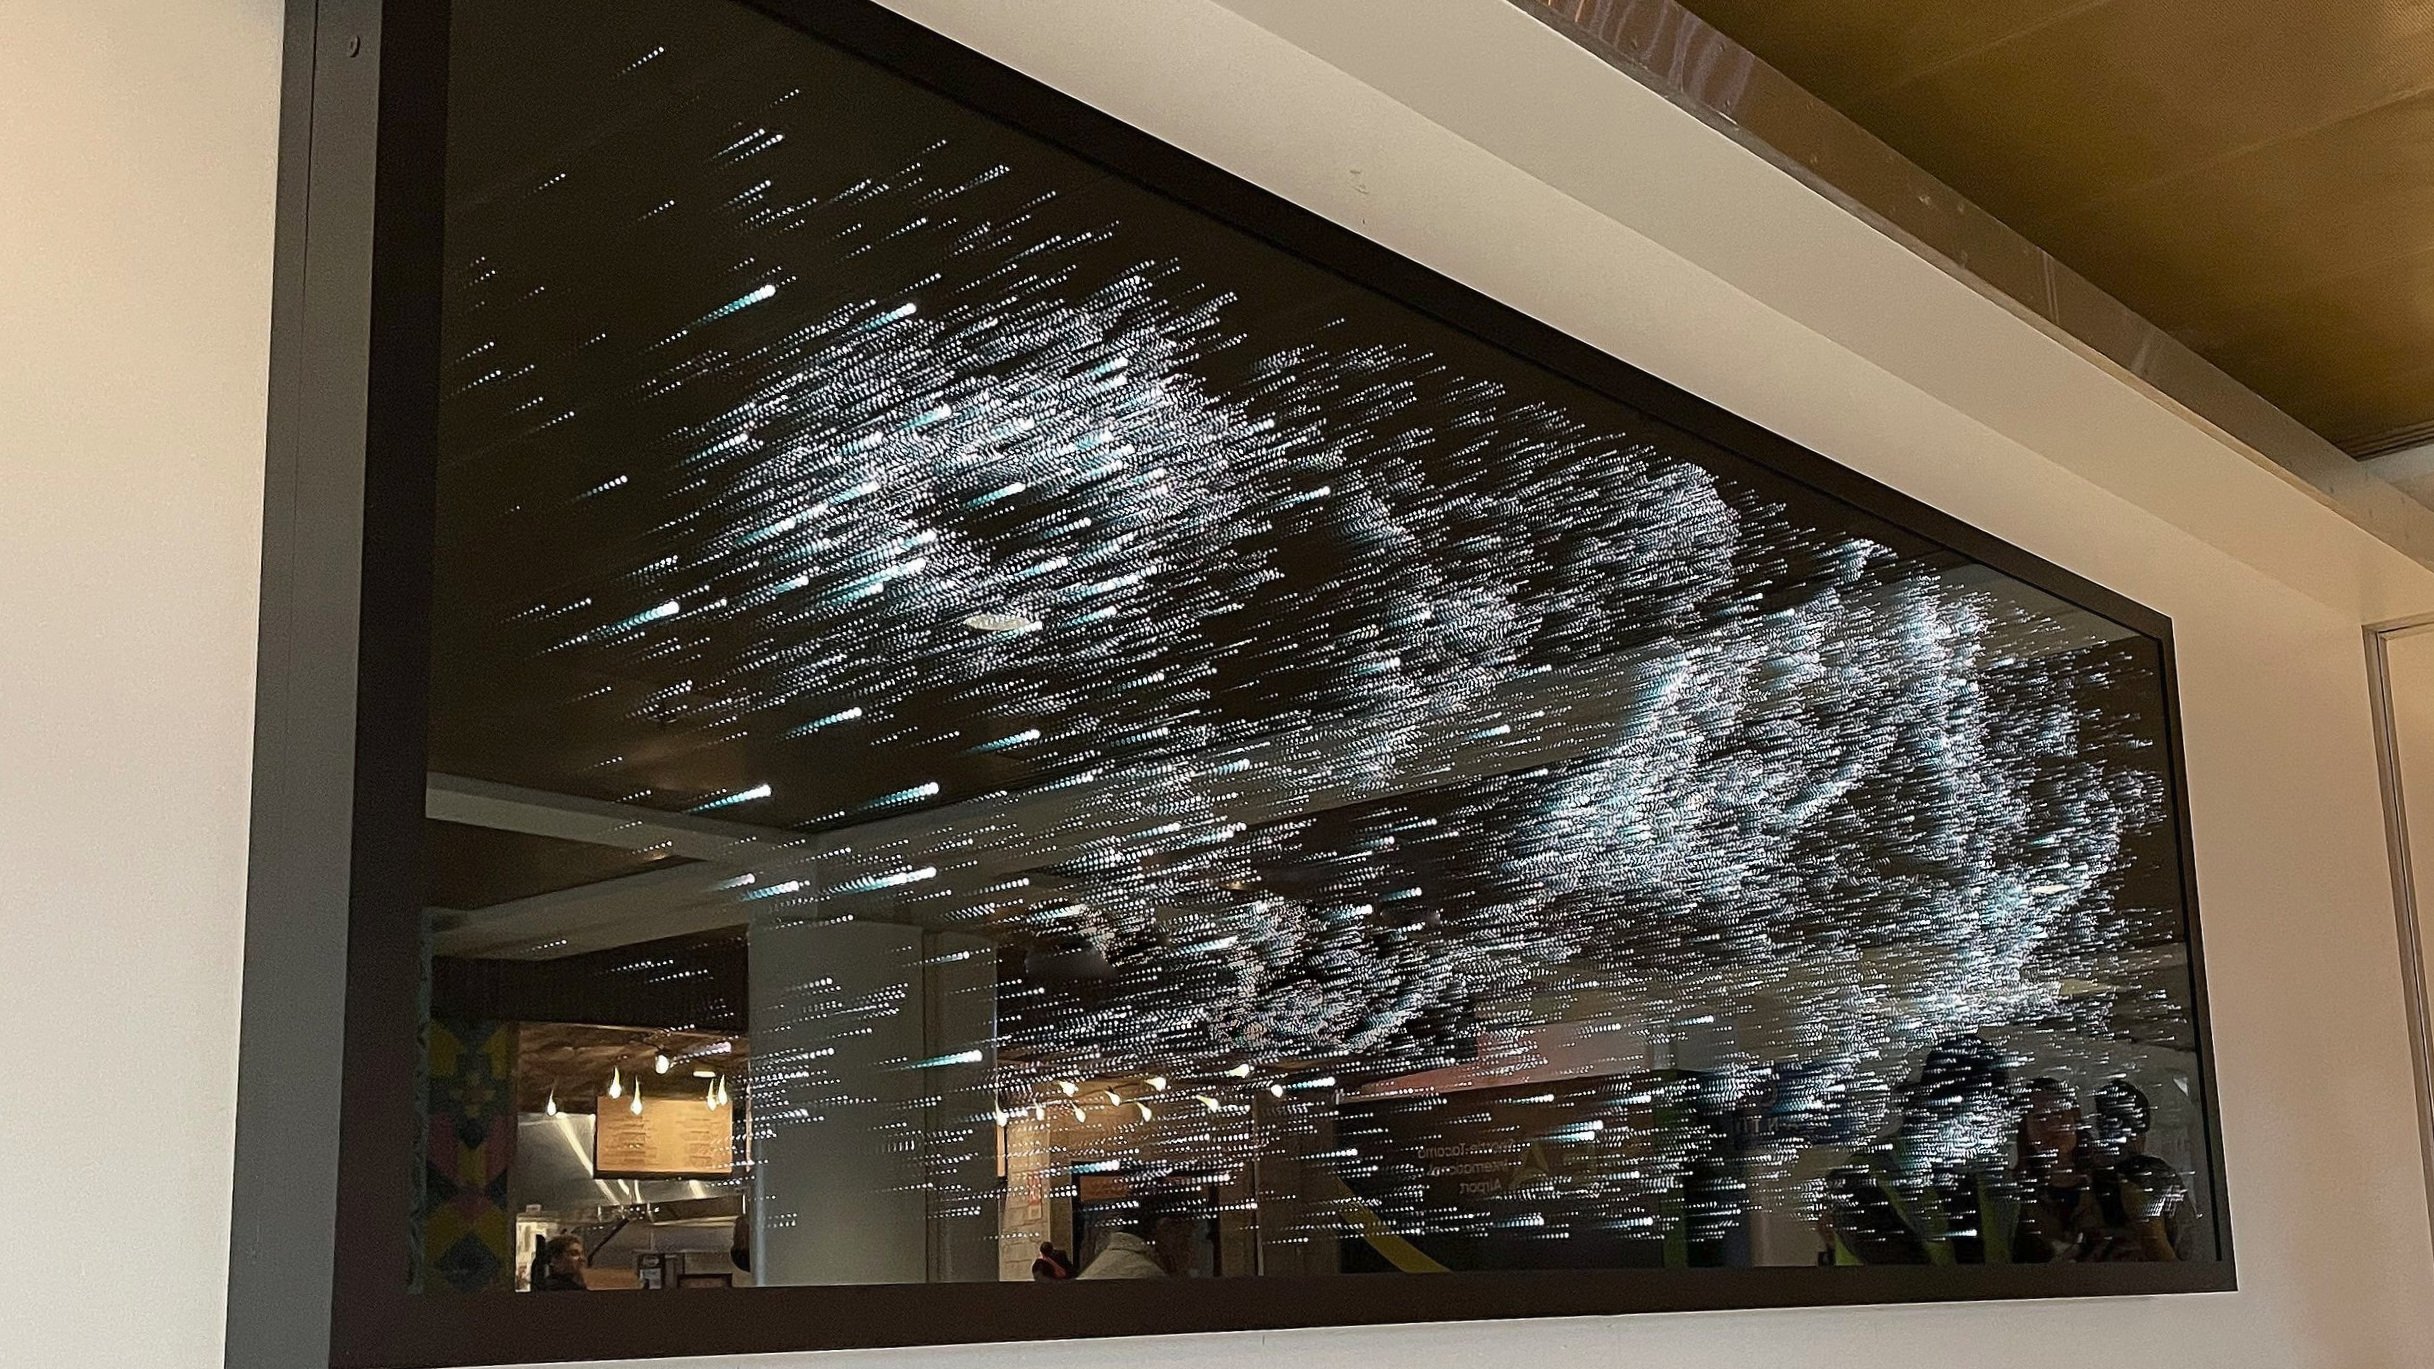 The generative light sculpture captures a new birth, flooding the starscape in a flash of white light.